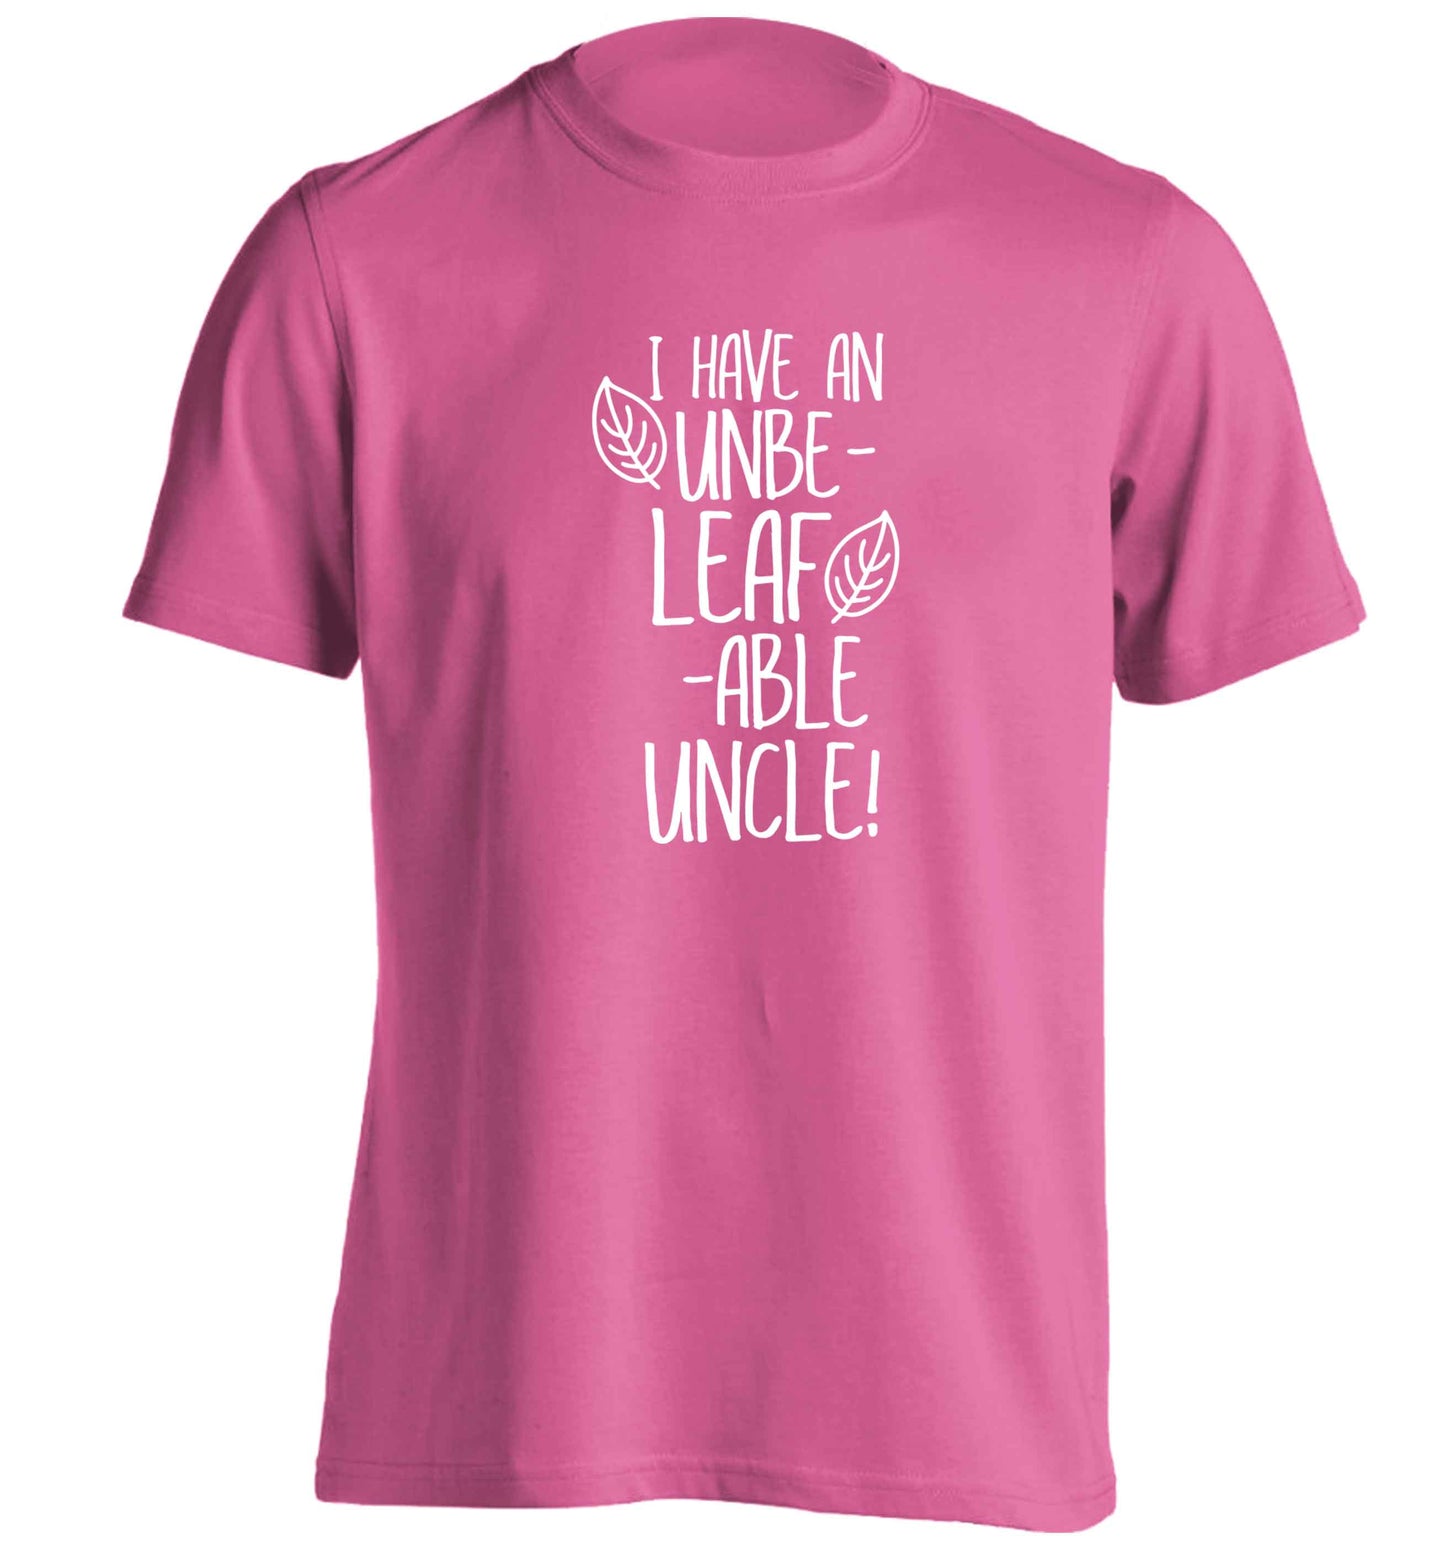 I have an unbe-leaf-able uncle adults unisex pink Tshirt 2XL